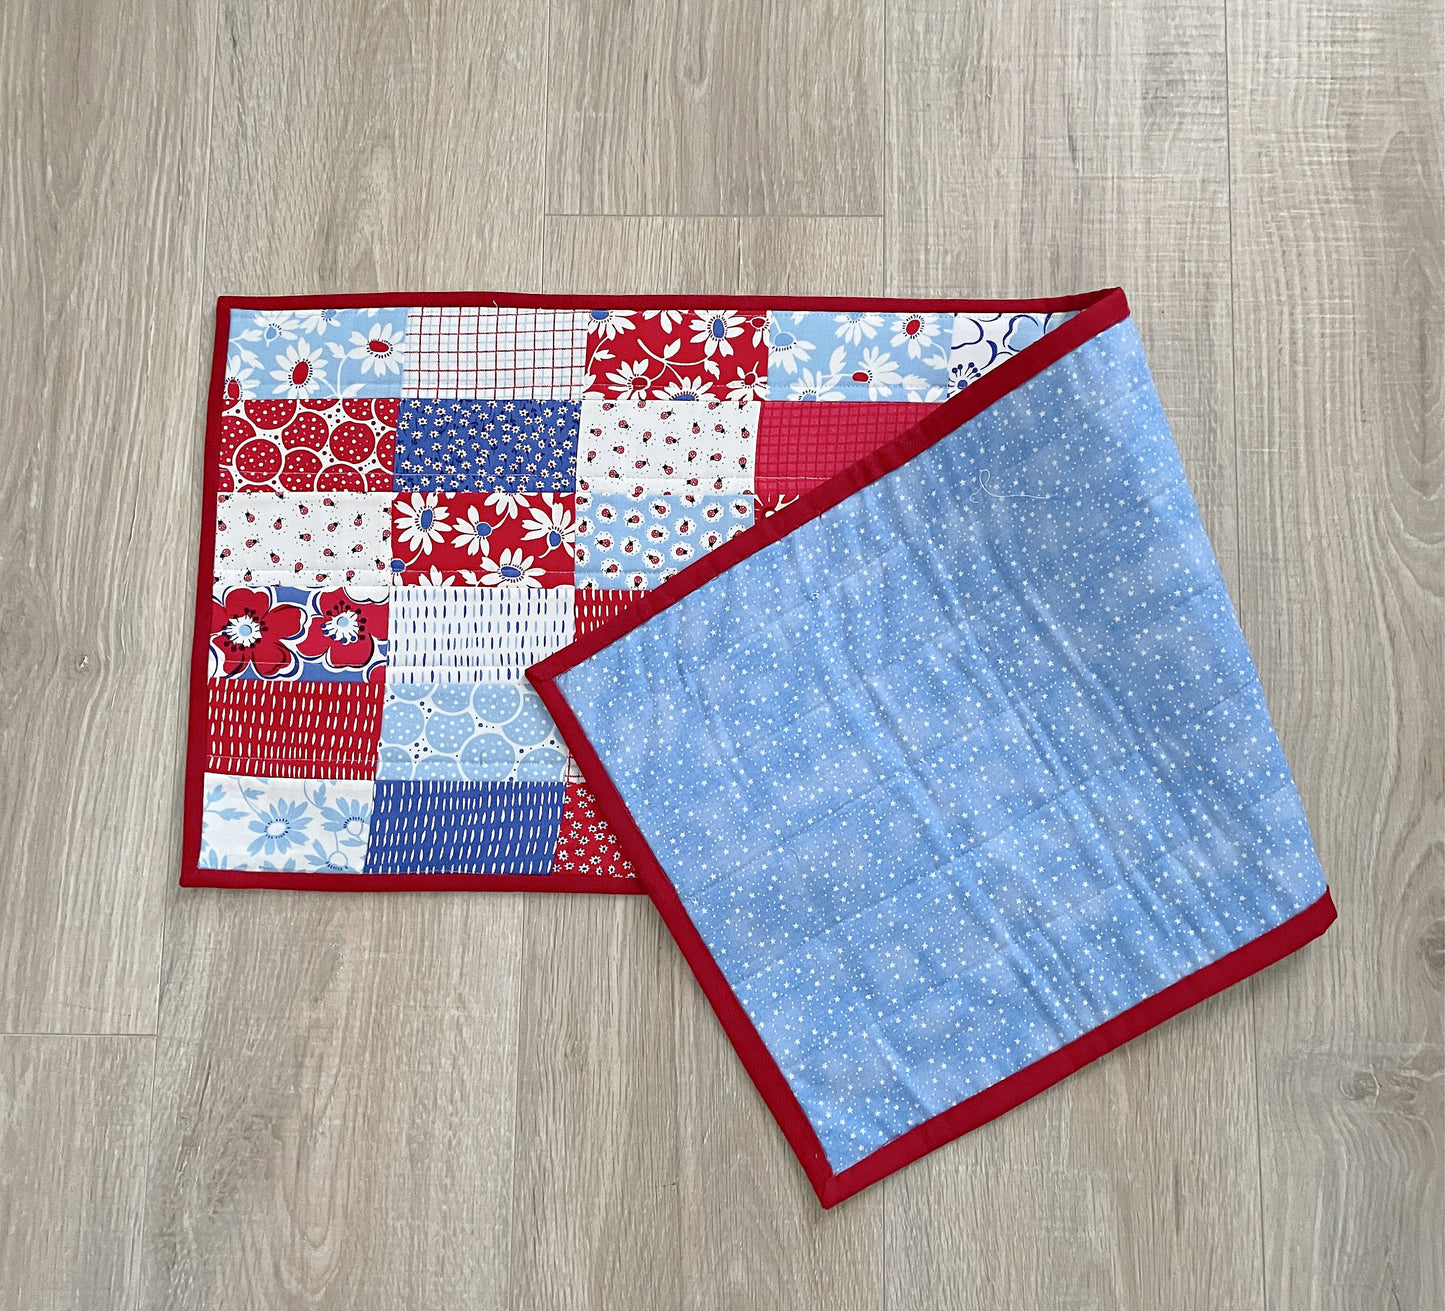 Handmade Quilted Table Runner, Red White and Blue Retro Floral Runner,